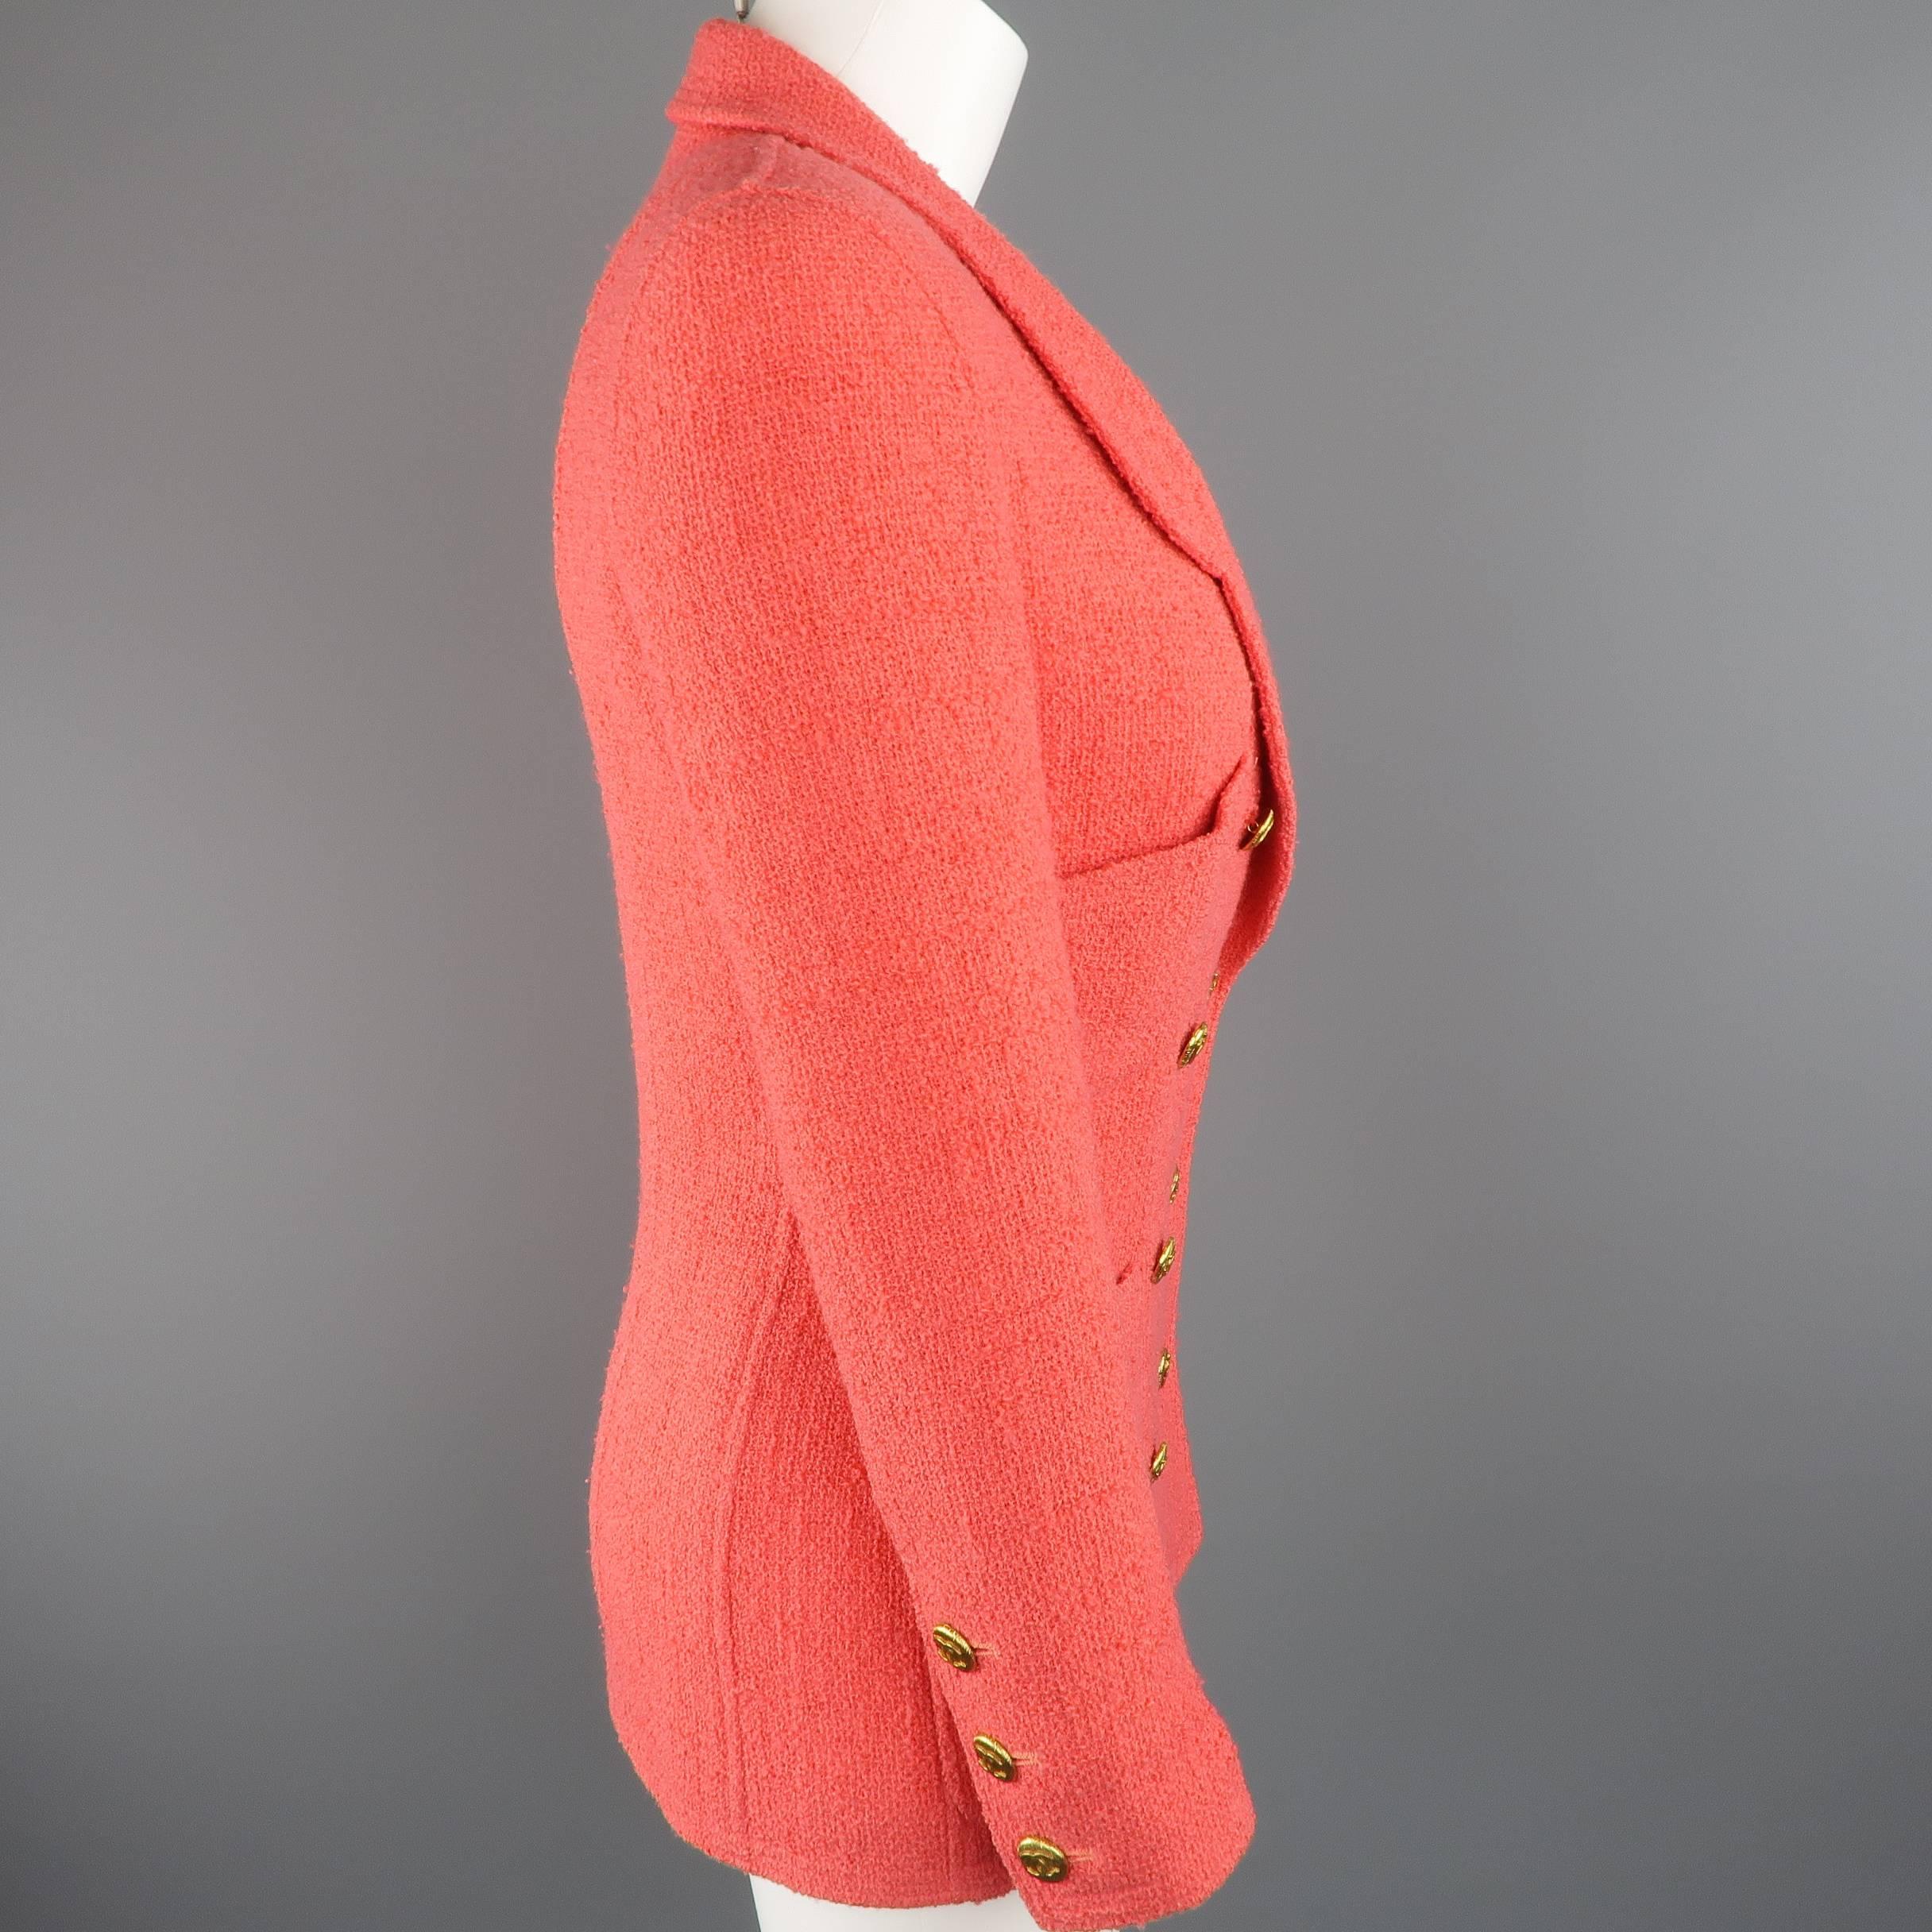 Chanel Jacket - Size 4 Coral Wool Boucle Double Breasted Gold Button Jacket 1